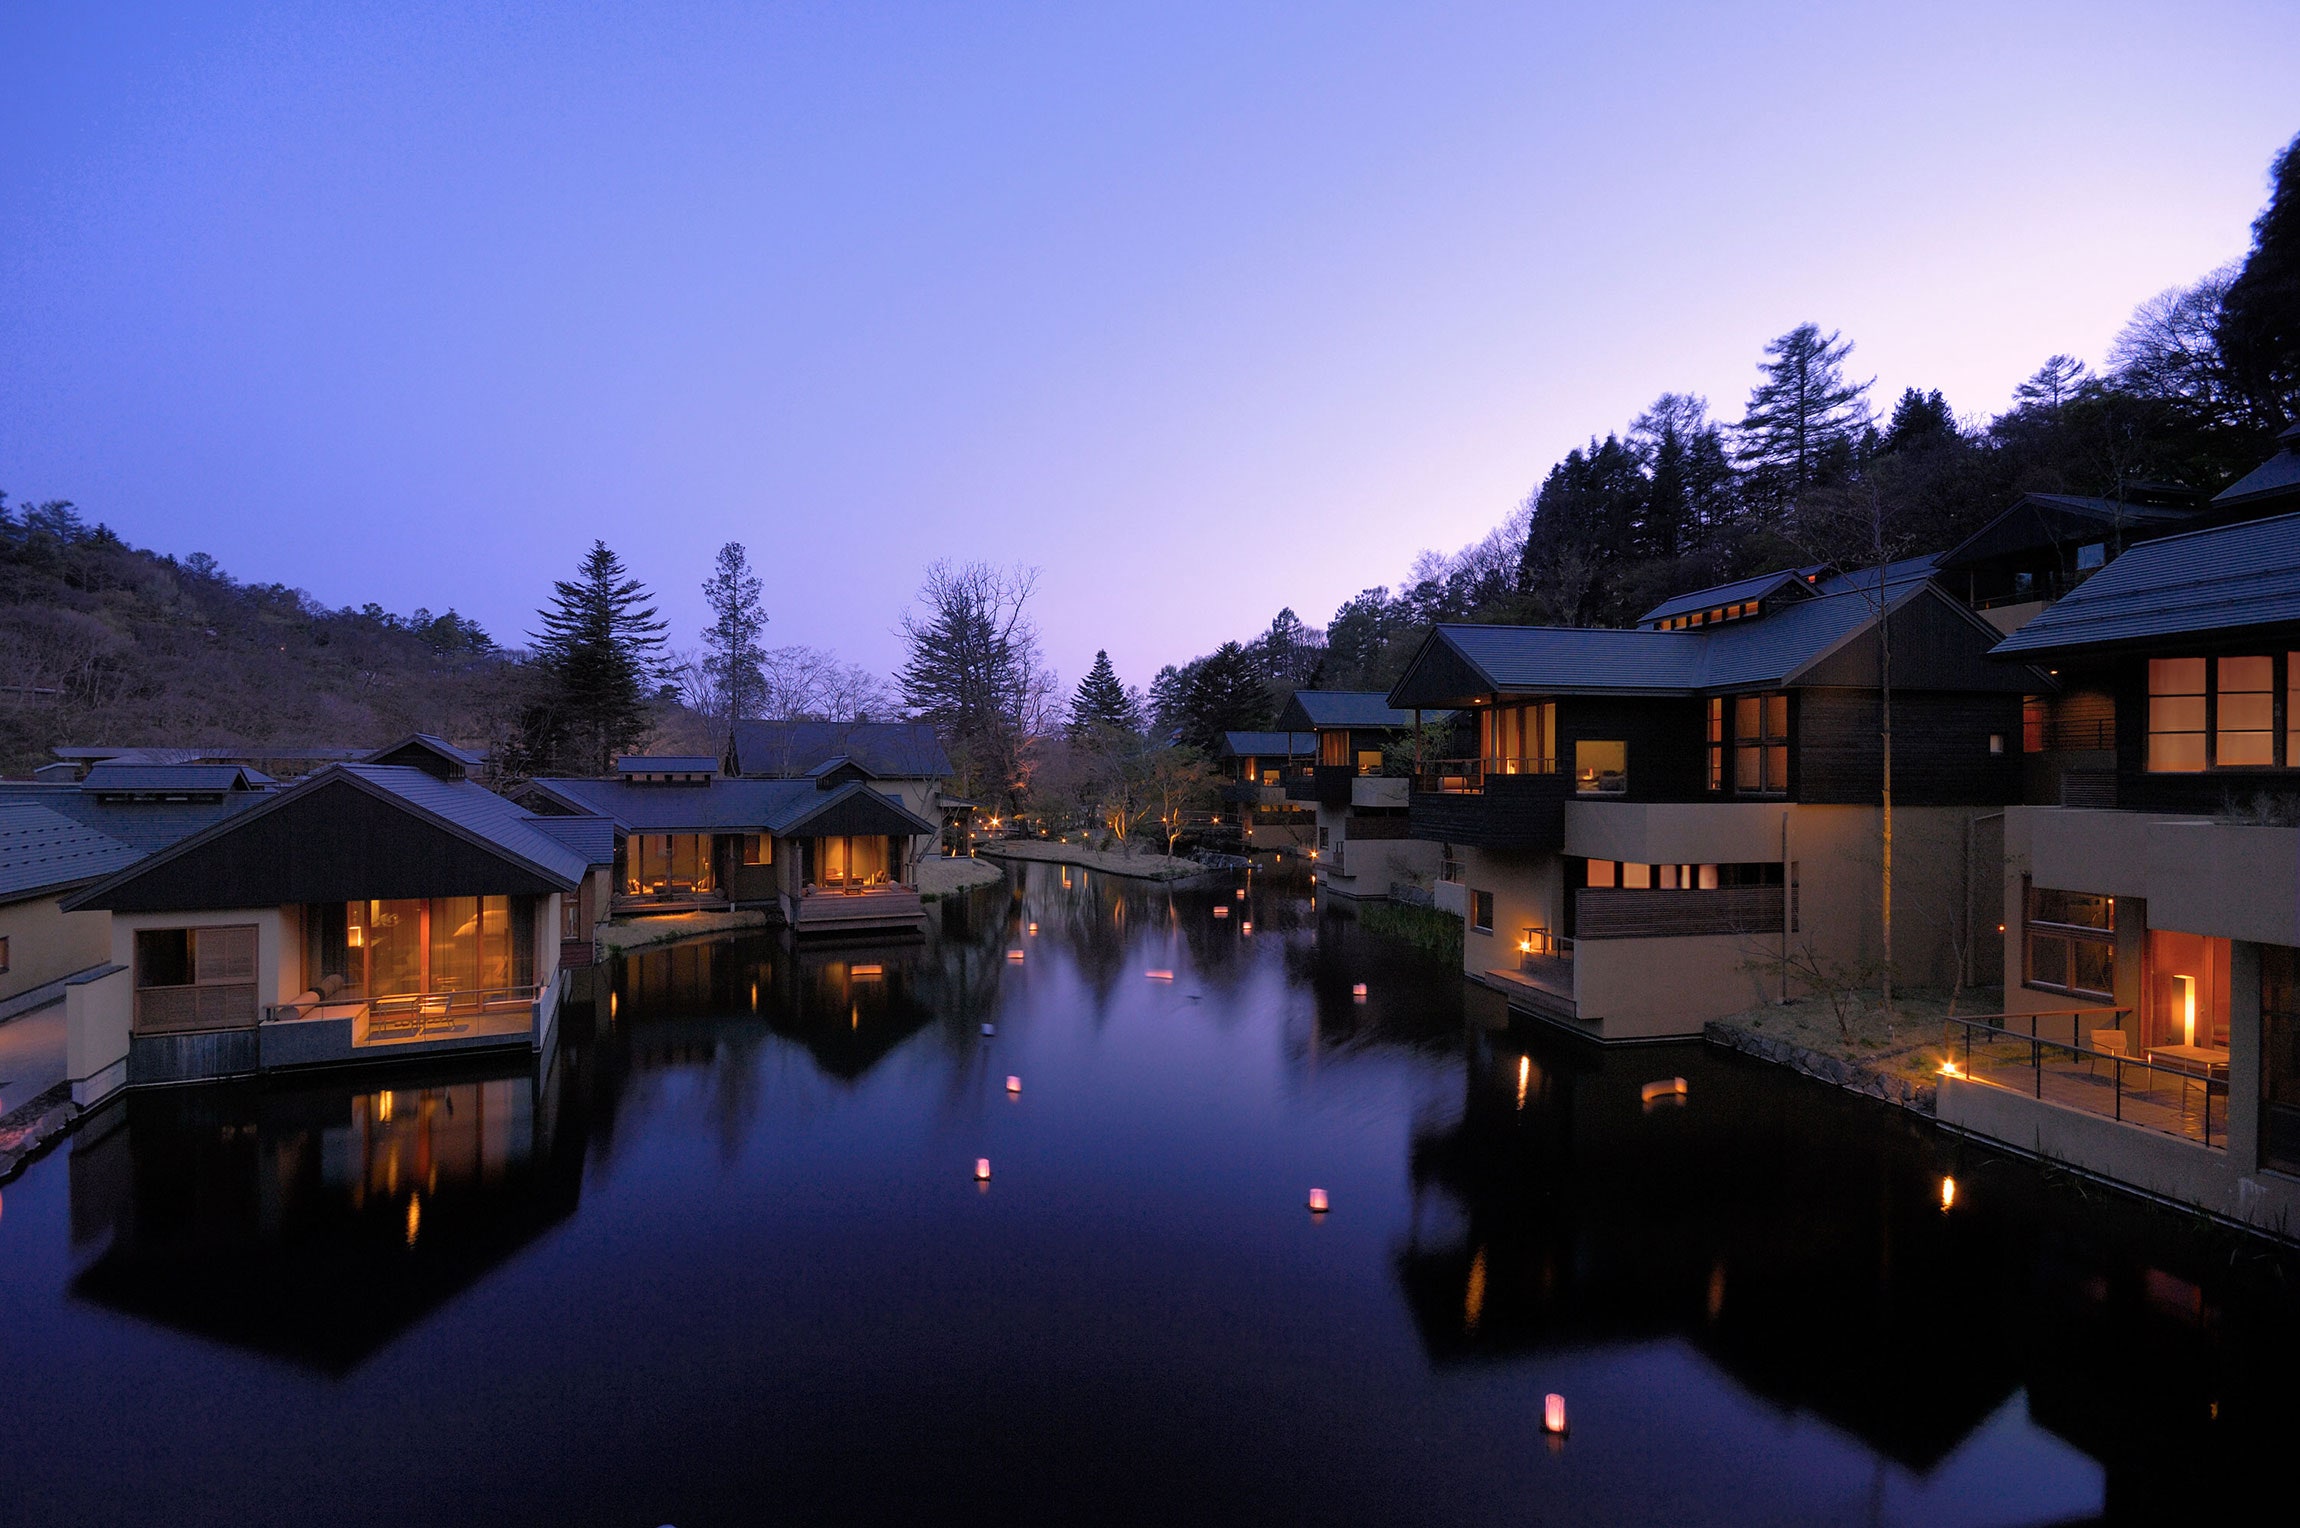 <p>Located at the base of Mount Asama, the idyllic <a href="https://hoshinoya.com/karuizawa/en/">Hoshinoya Karuizawa</a> looks more like a small village than a hotel. Two <em>onsens</em> (one public, the other private) are at your disposal, as is a 24-hour library lounge, inclusive of books, snacks, chaise lounges, and even Hakushu whiskey. Opt for a Mizunami room if you want to be right along the flowing river, which you can take in from your own terrace. Don’t forget to make a reservation at the resort’s restaurant Kasuke for a delicious <em>kaiseki</em> dinner.</p> <p><a href="https://www.expedia.com/Karuizawa-Hotels-HOSHINOYA-Karuizawa.h2824199.Hotel-Information"><em>Book now</em></a>.</p><p>Sign up for our newsletter to get the latest in design, decorating, celebrity style, shopping, and more.</p><a href="https://www.architecturaldigest.com/newsletter/subscribe?sourceCode=msnsend">Sign Up Now</a>